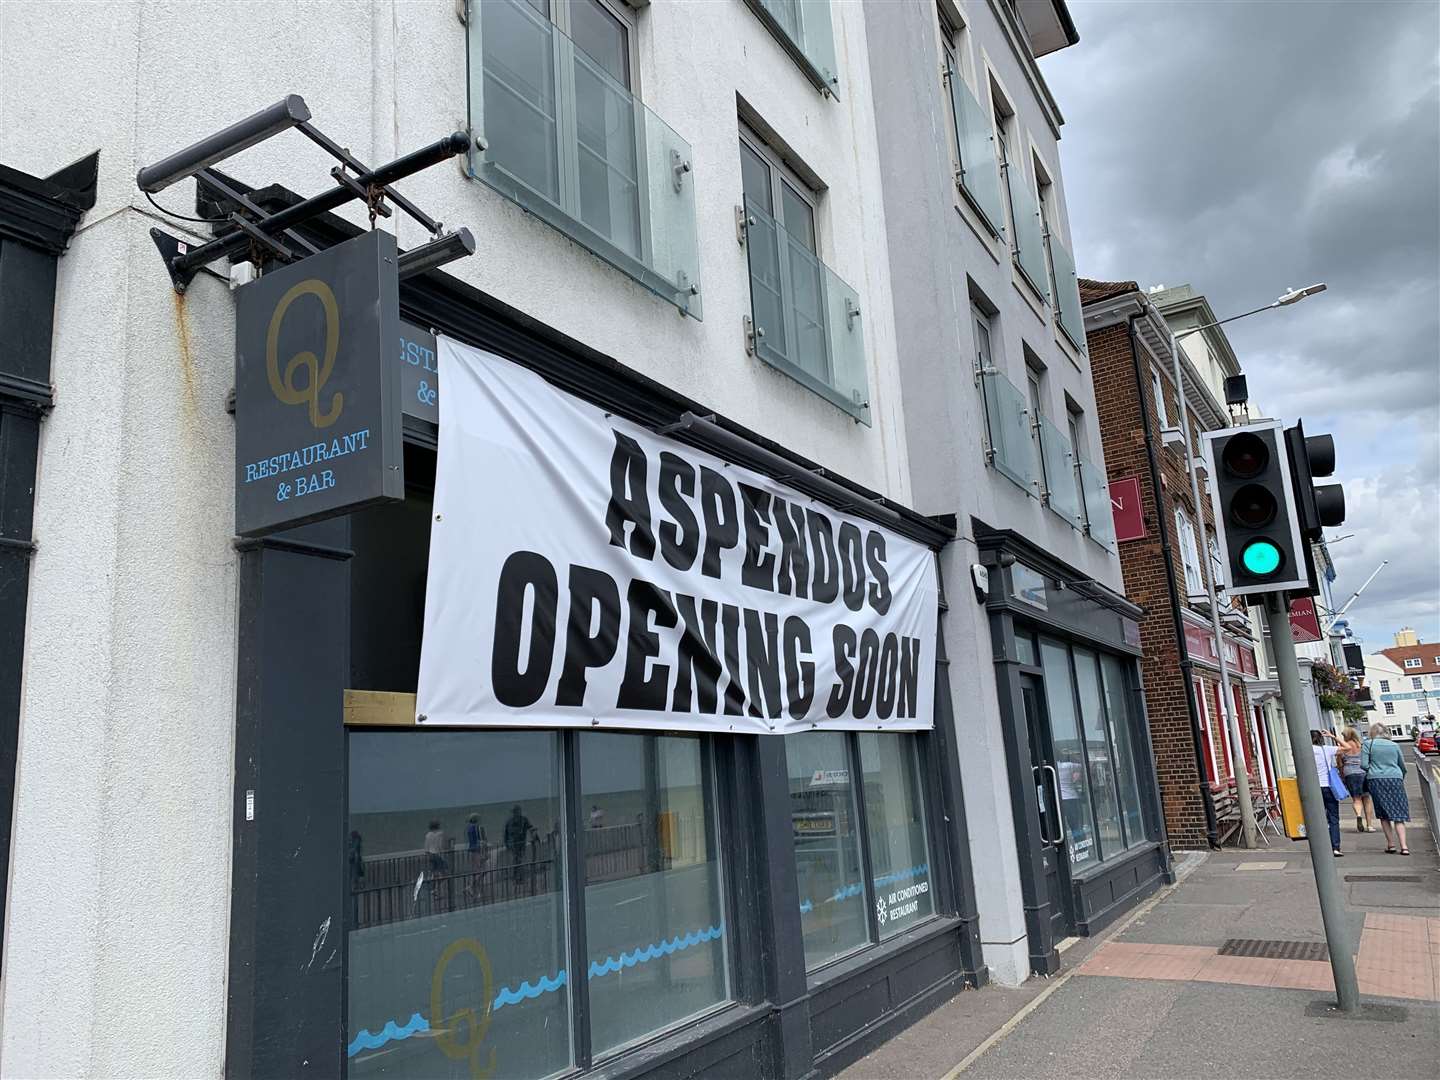 The Aspendos chain has announced it will open a restaurant in Deal